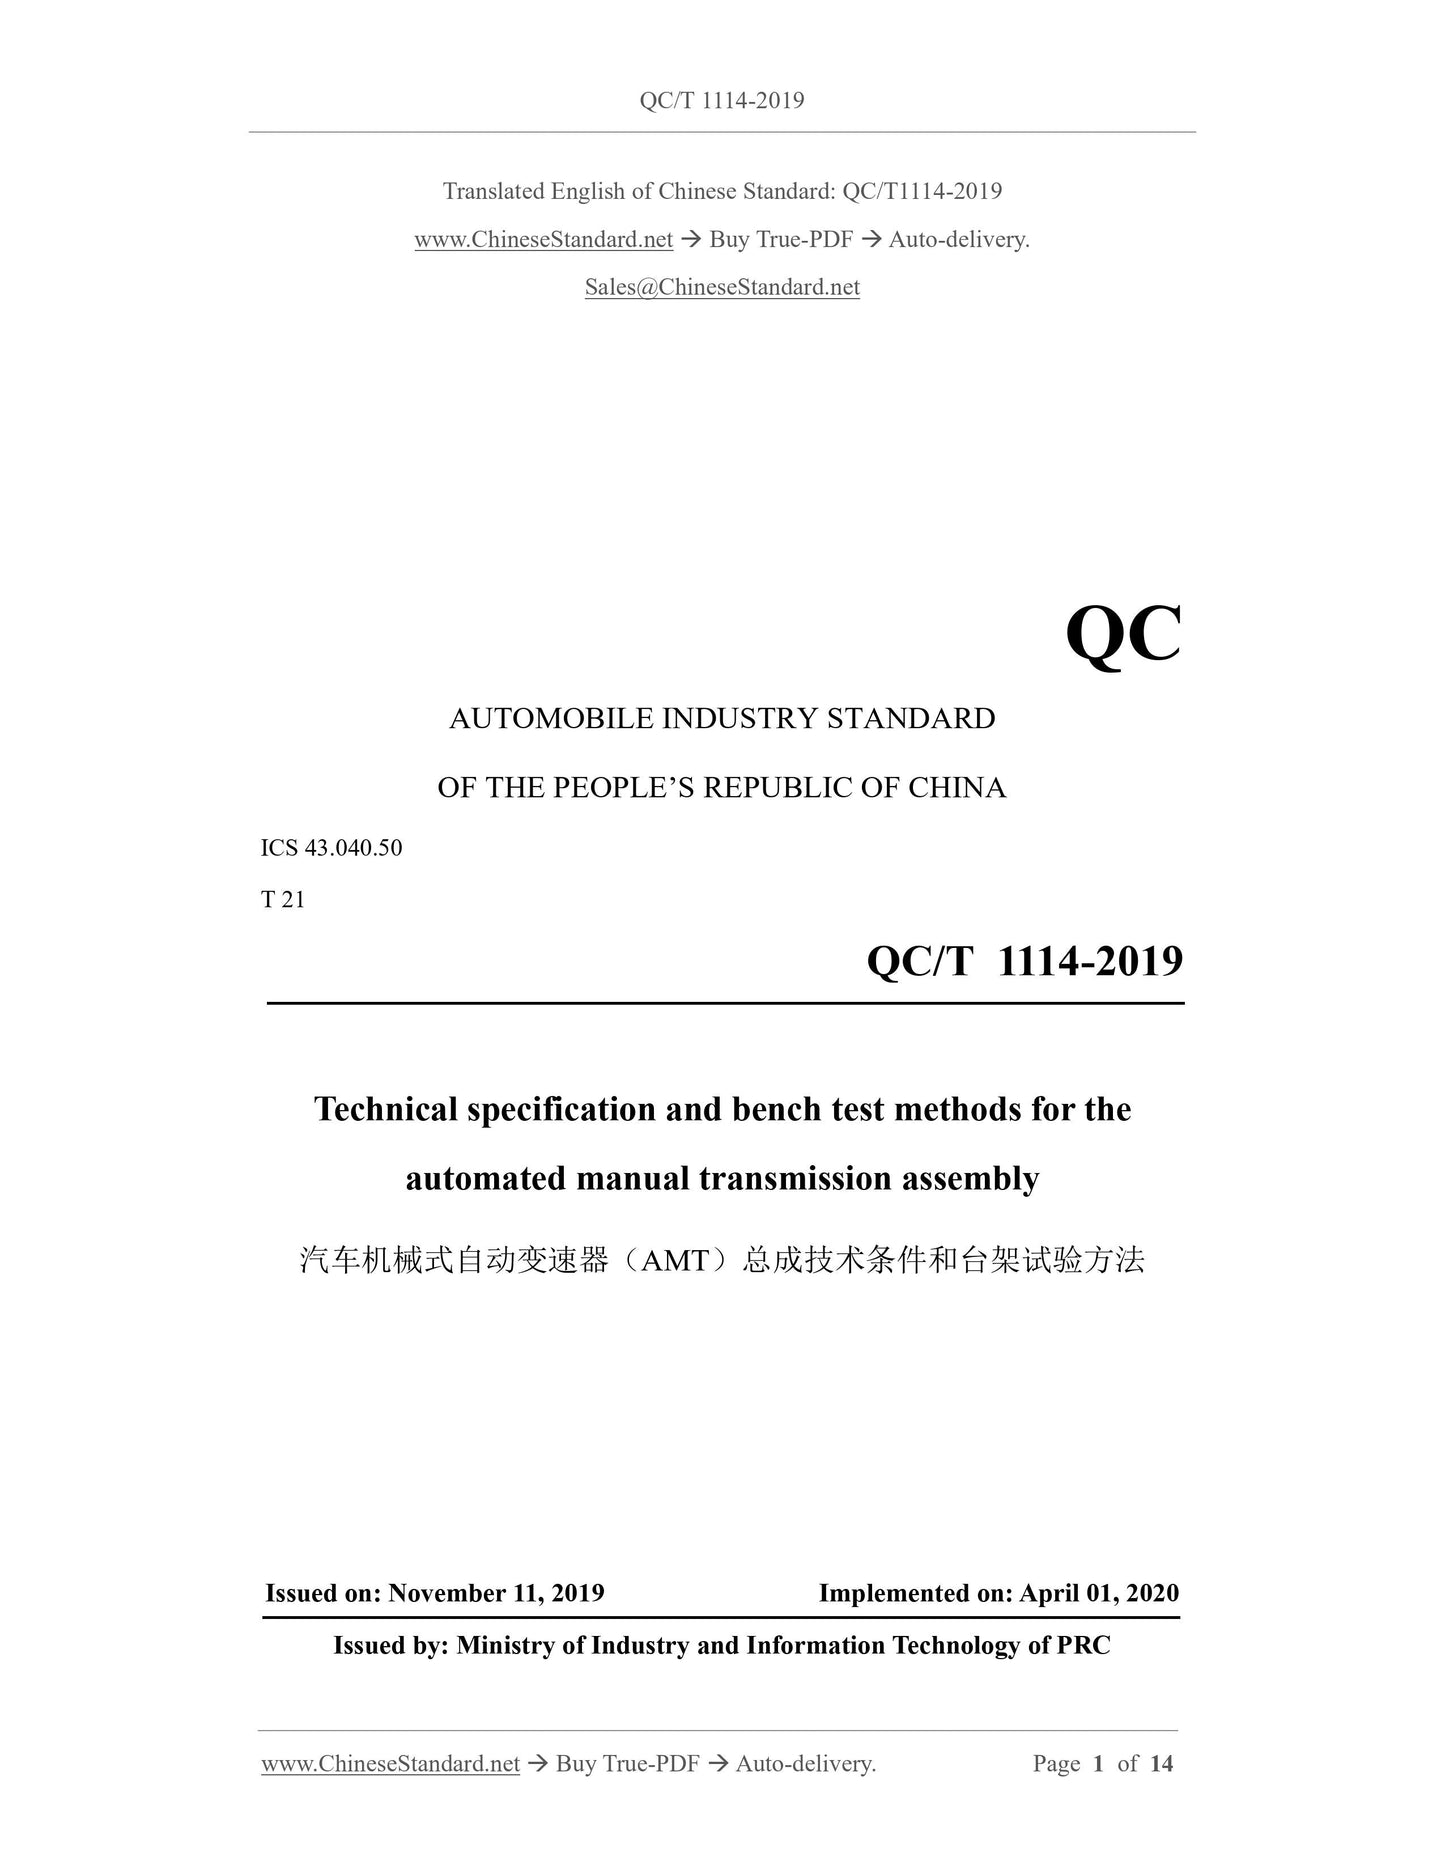 QC/T 1114-2019 Page 1